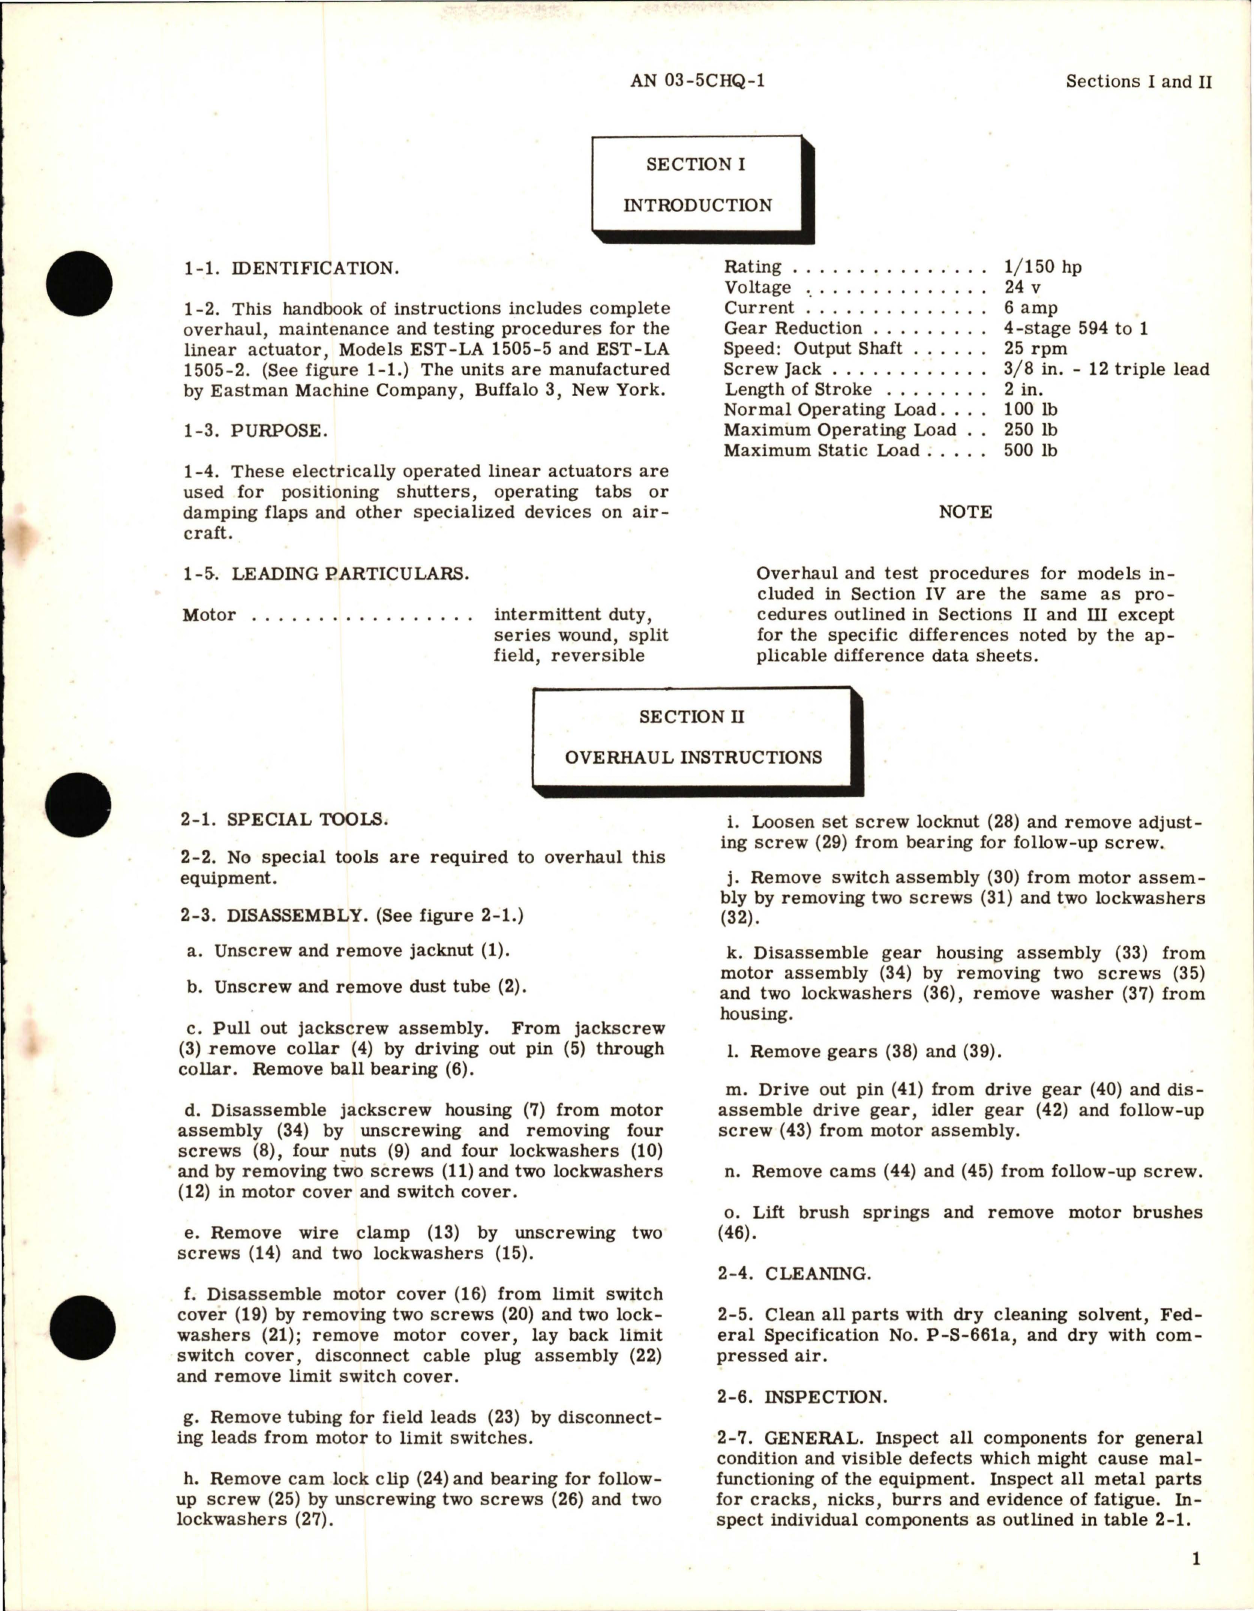 Sample page 5 from AirCorps Library document: Overhaul Instructions for Linear Actuator Models LA 1505-5 and LA 1505-2